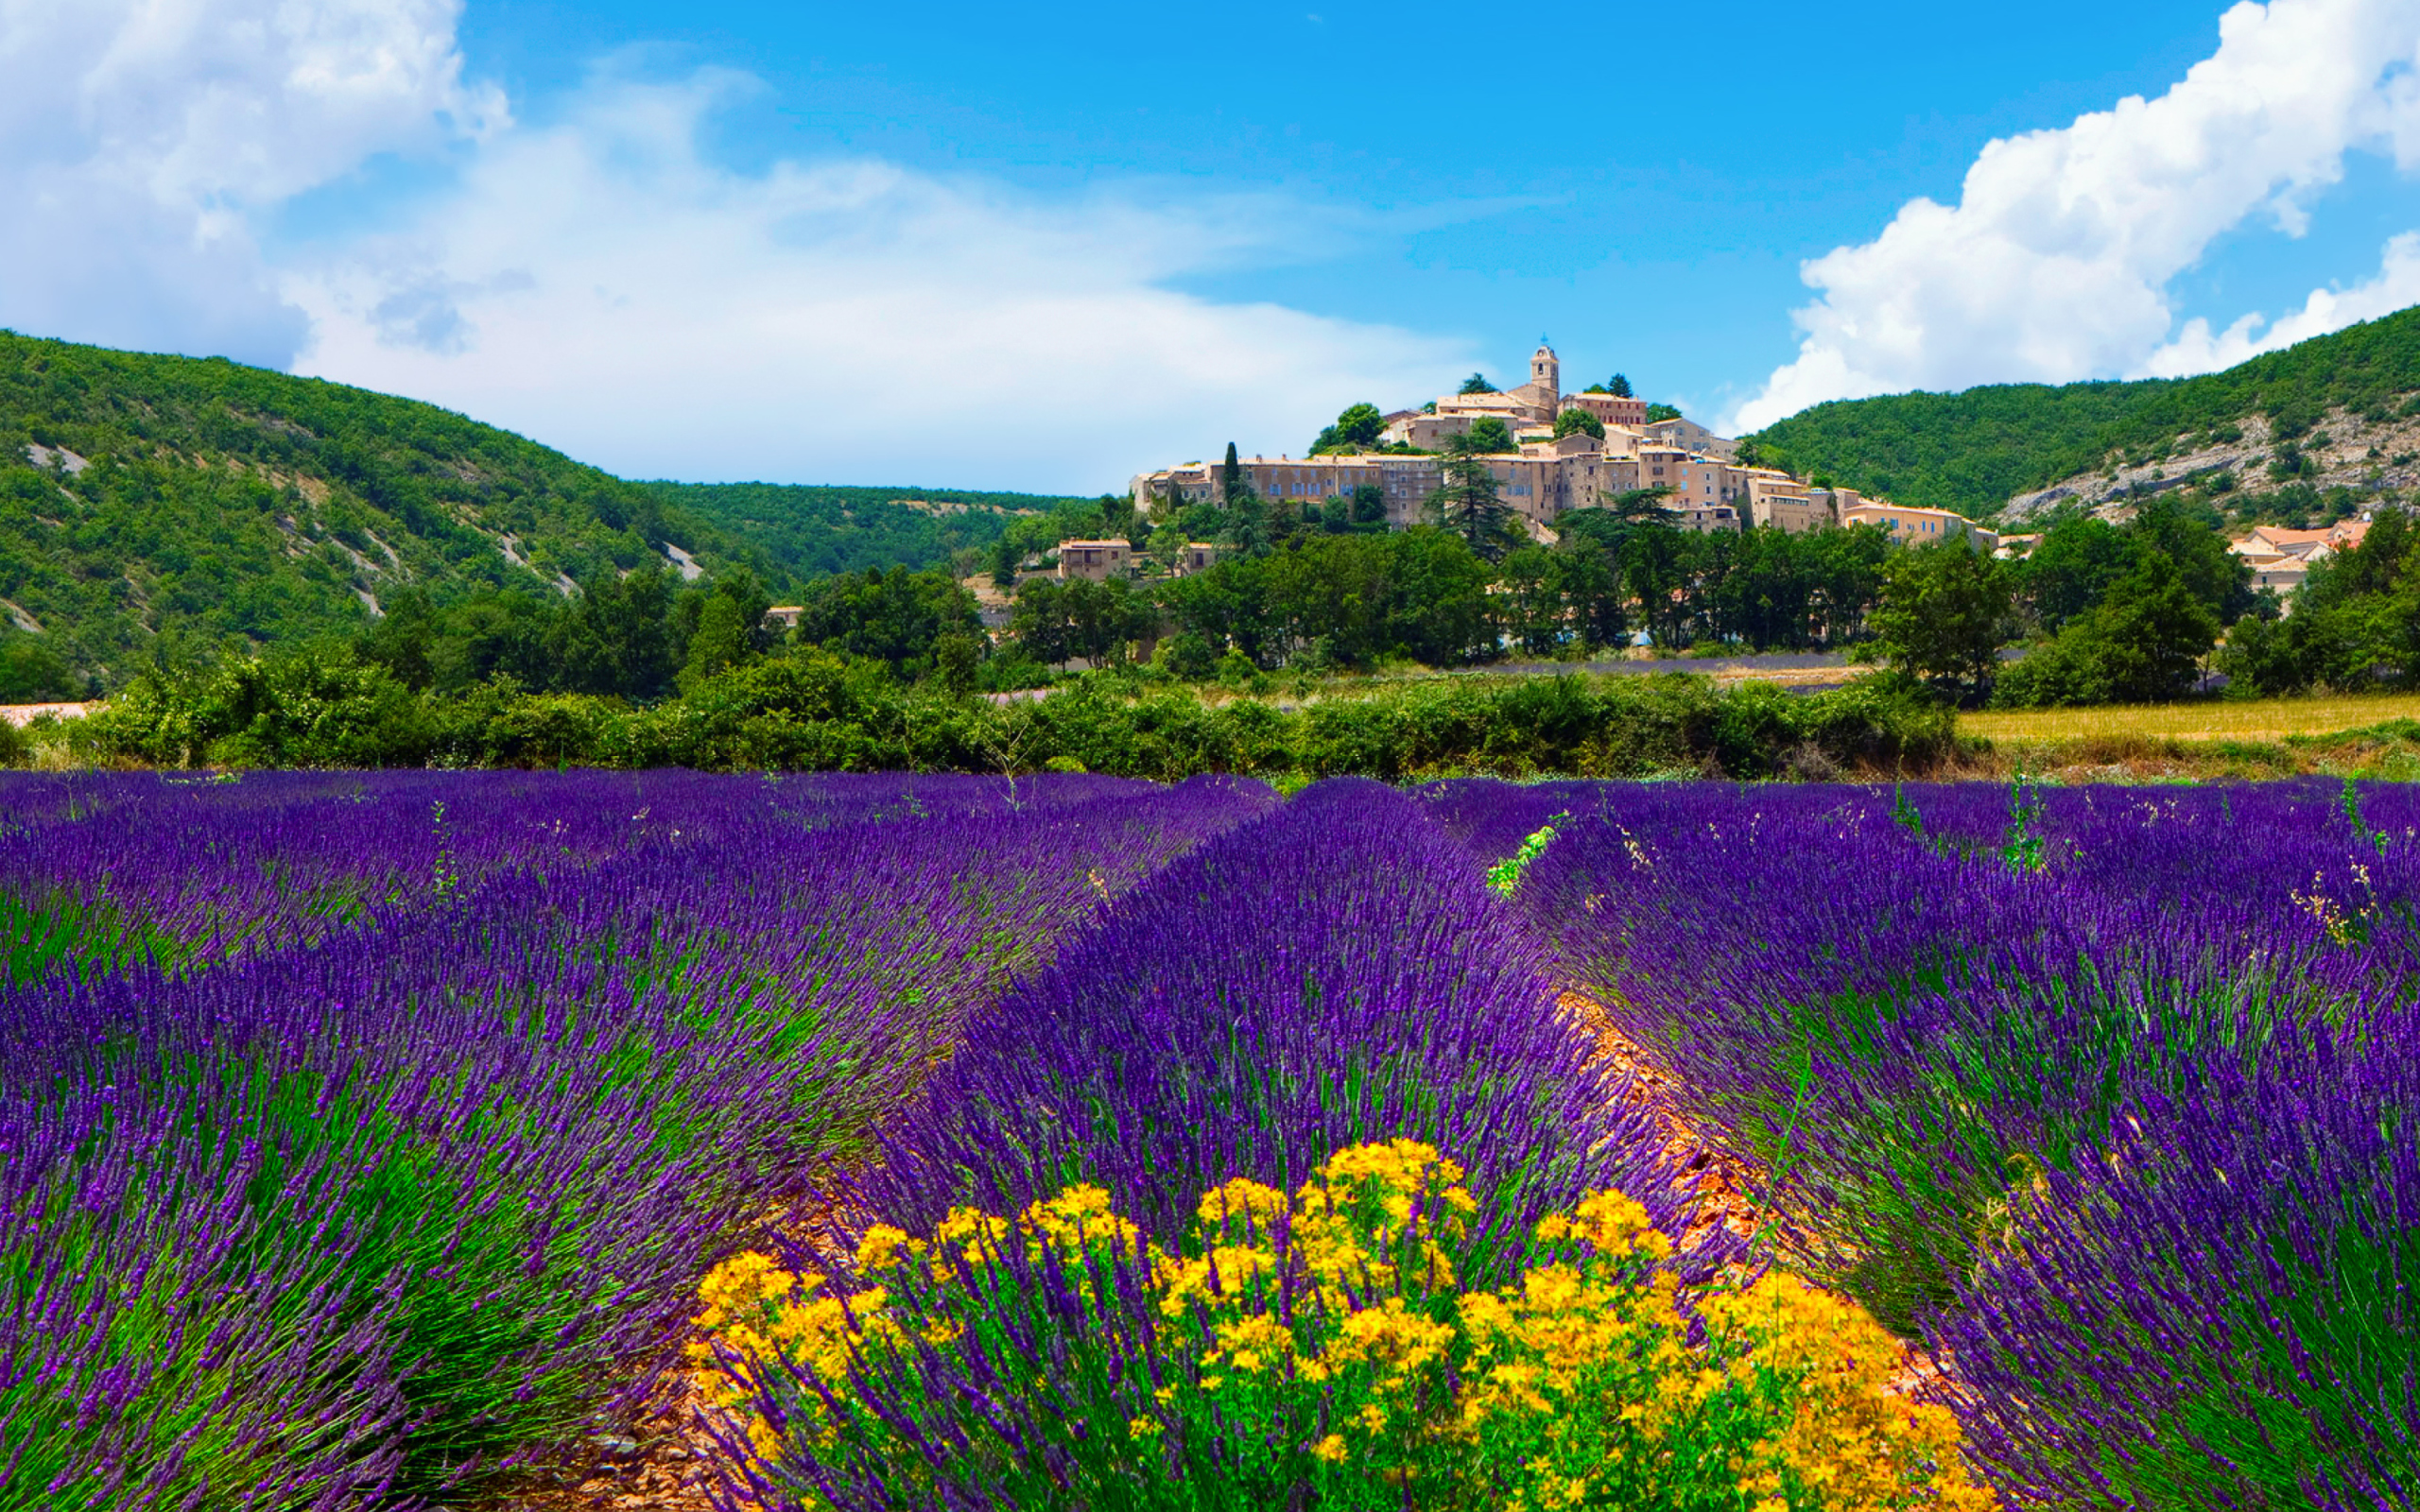 Lavender Field In Provence France wallpaper 2560x1600